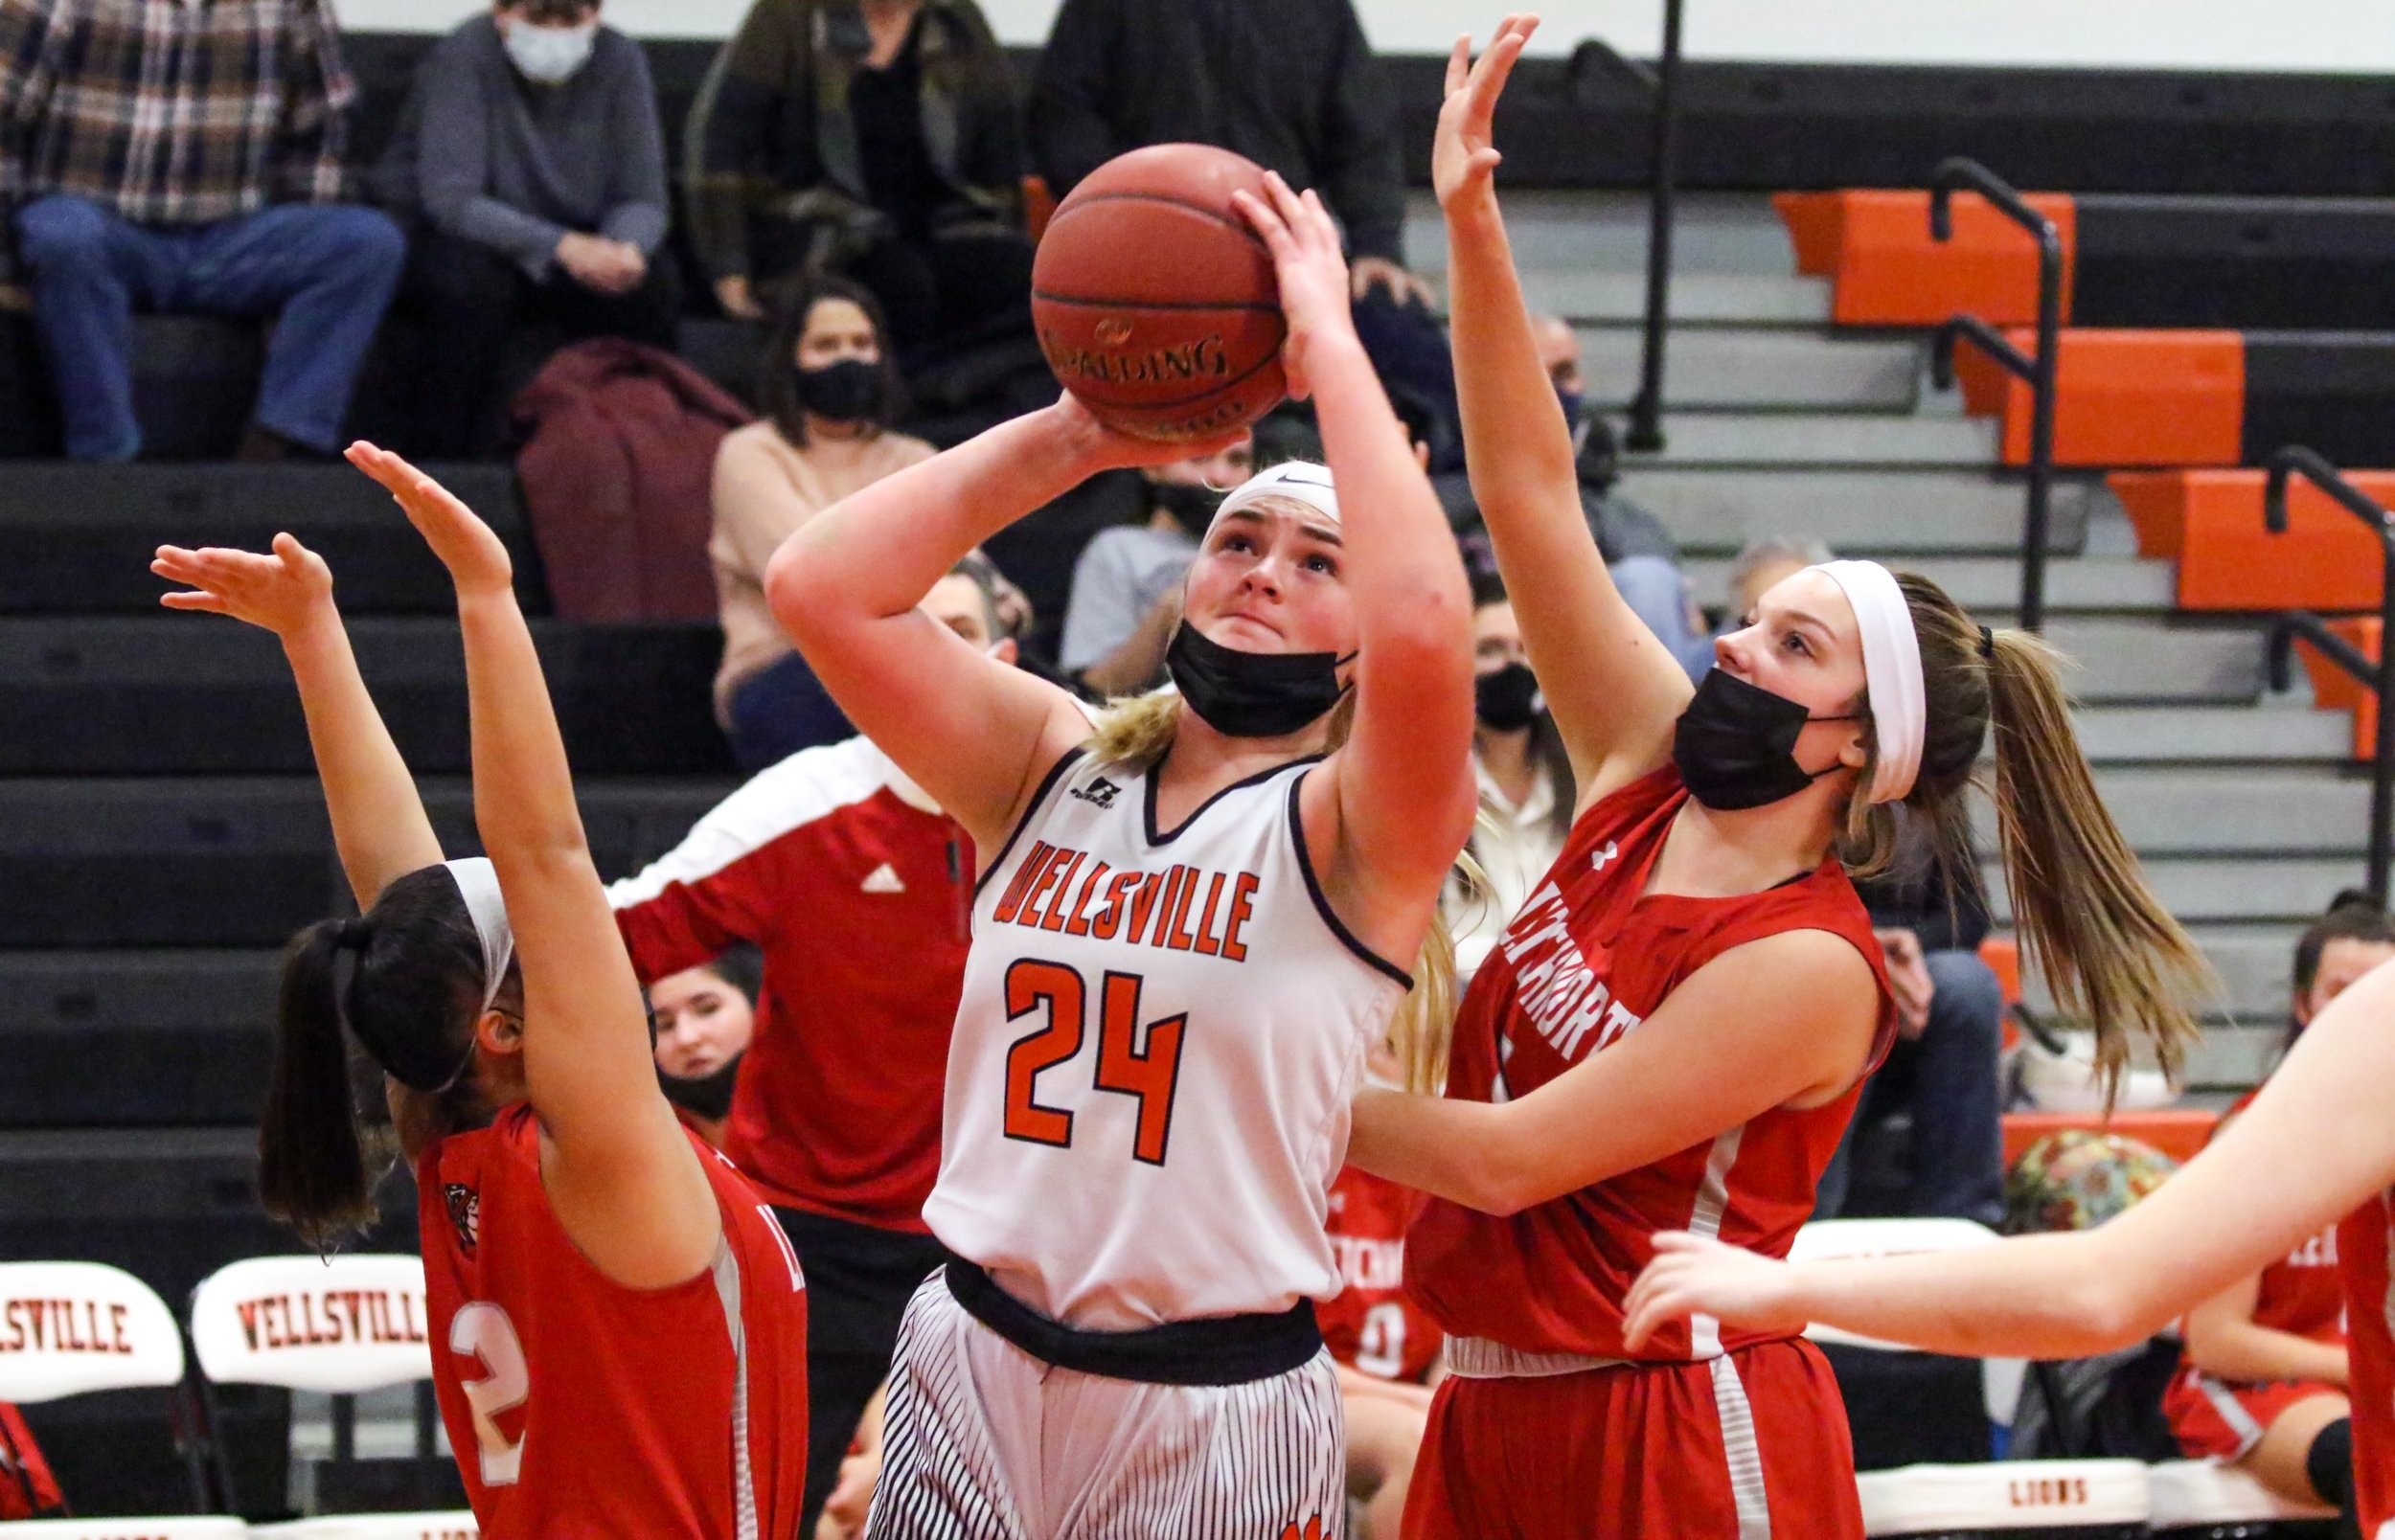  Wellsville sophomore Makenna Dunbar (24) splits the Letchworth defense on her way up to the basket during Saturday night’s home contest in Wellsville. [Chris Brooks/WellsvilleSports.com] 